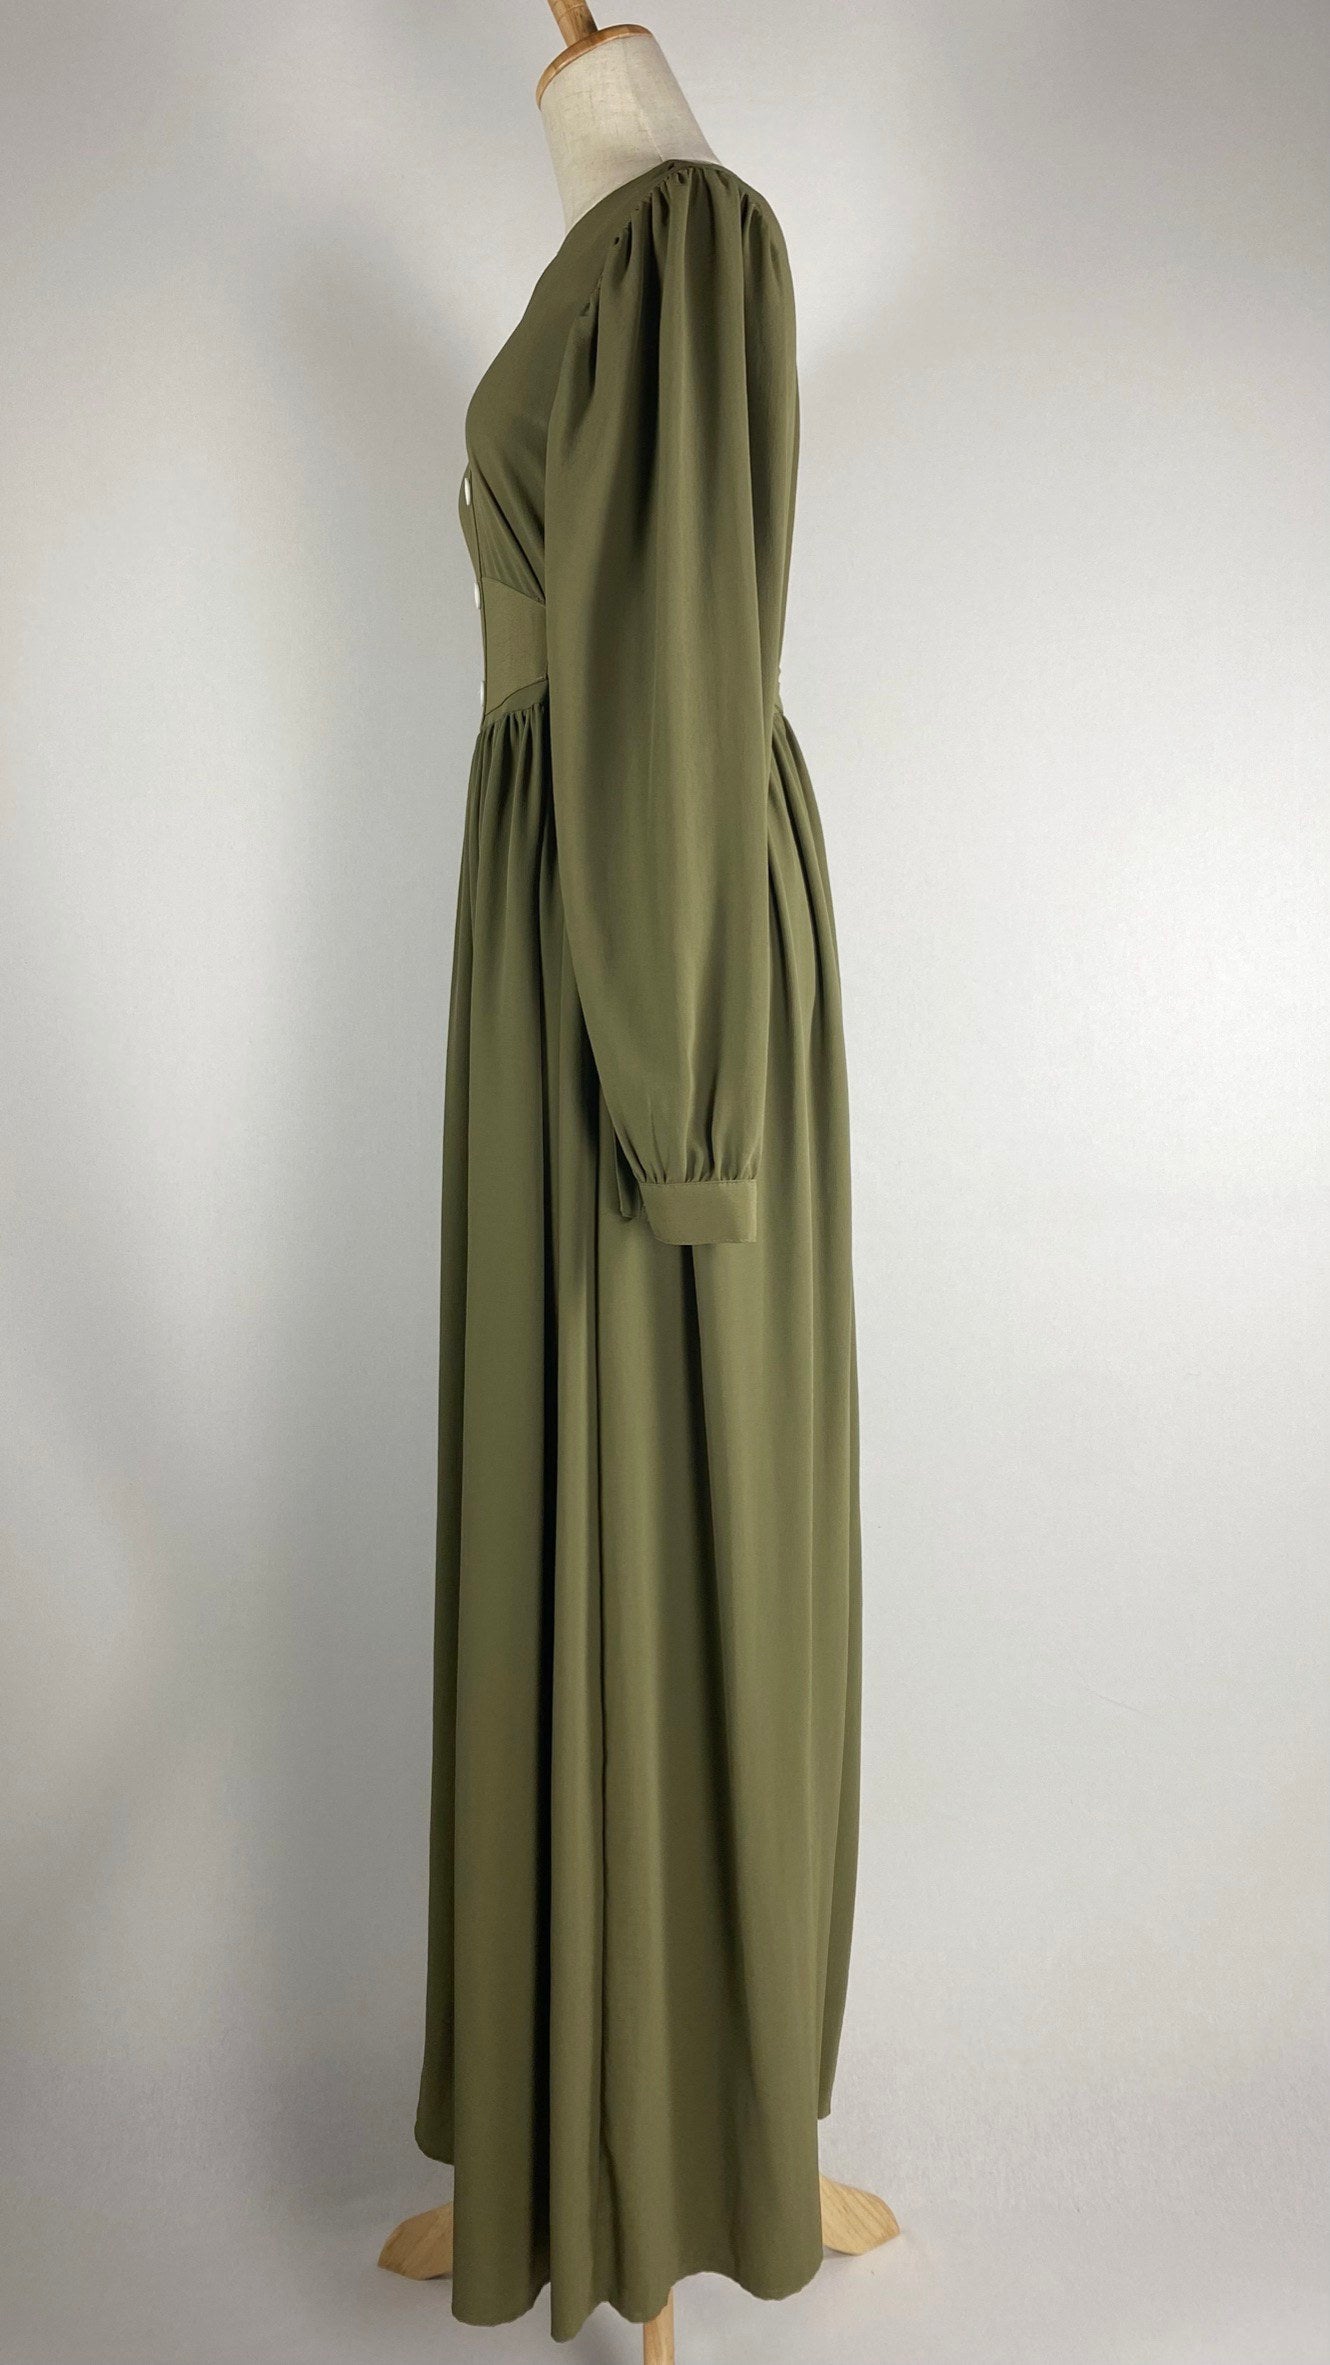 Long Sleeve Maxi Dress with Belted Waist, Green